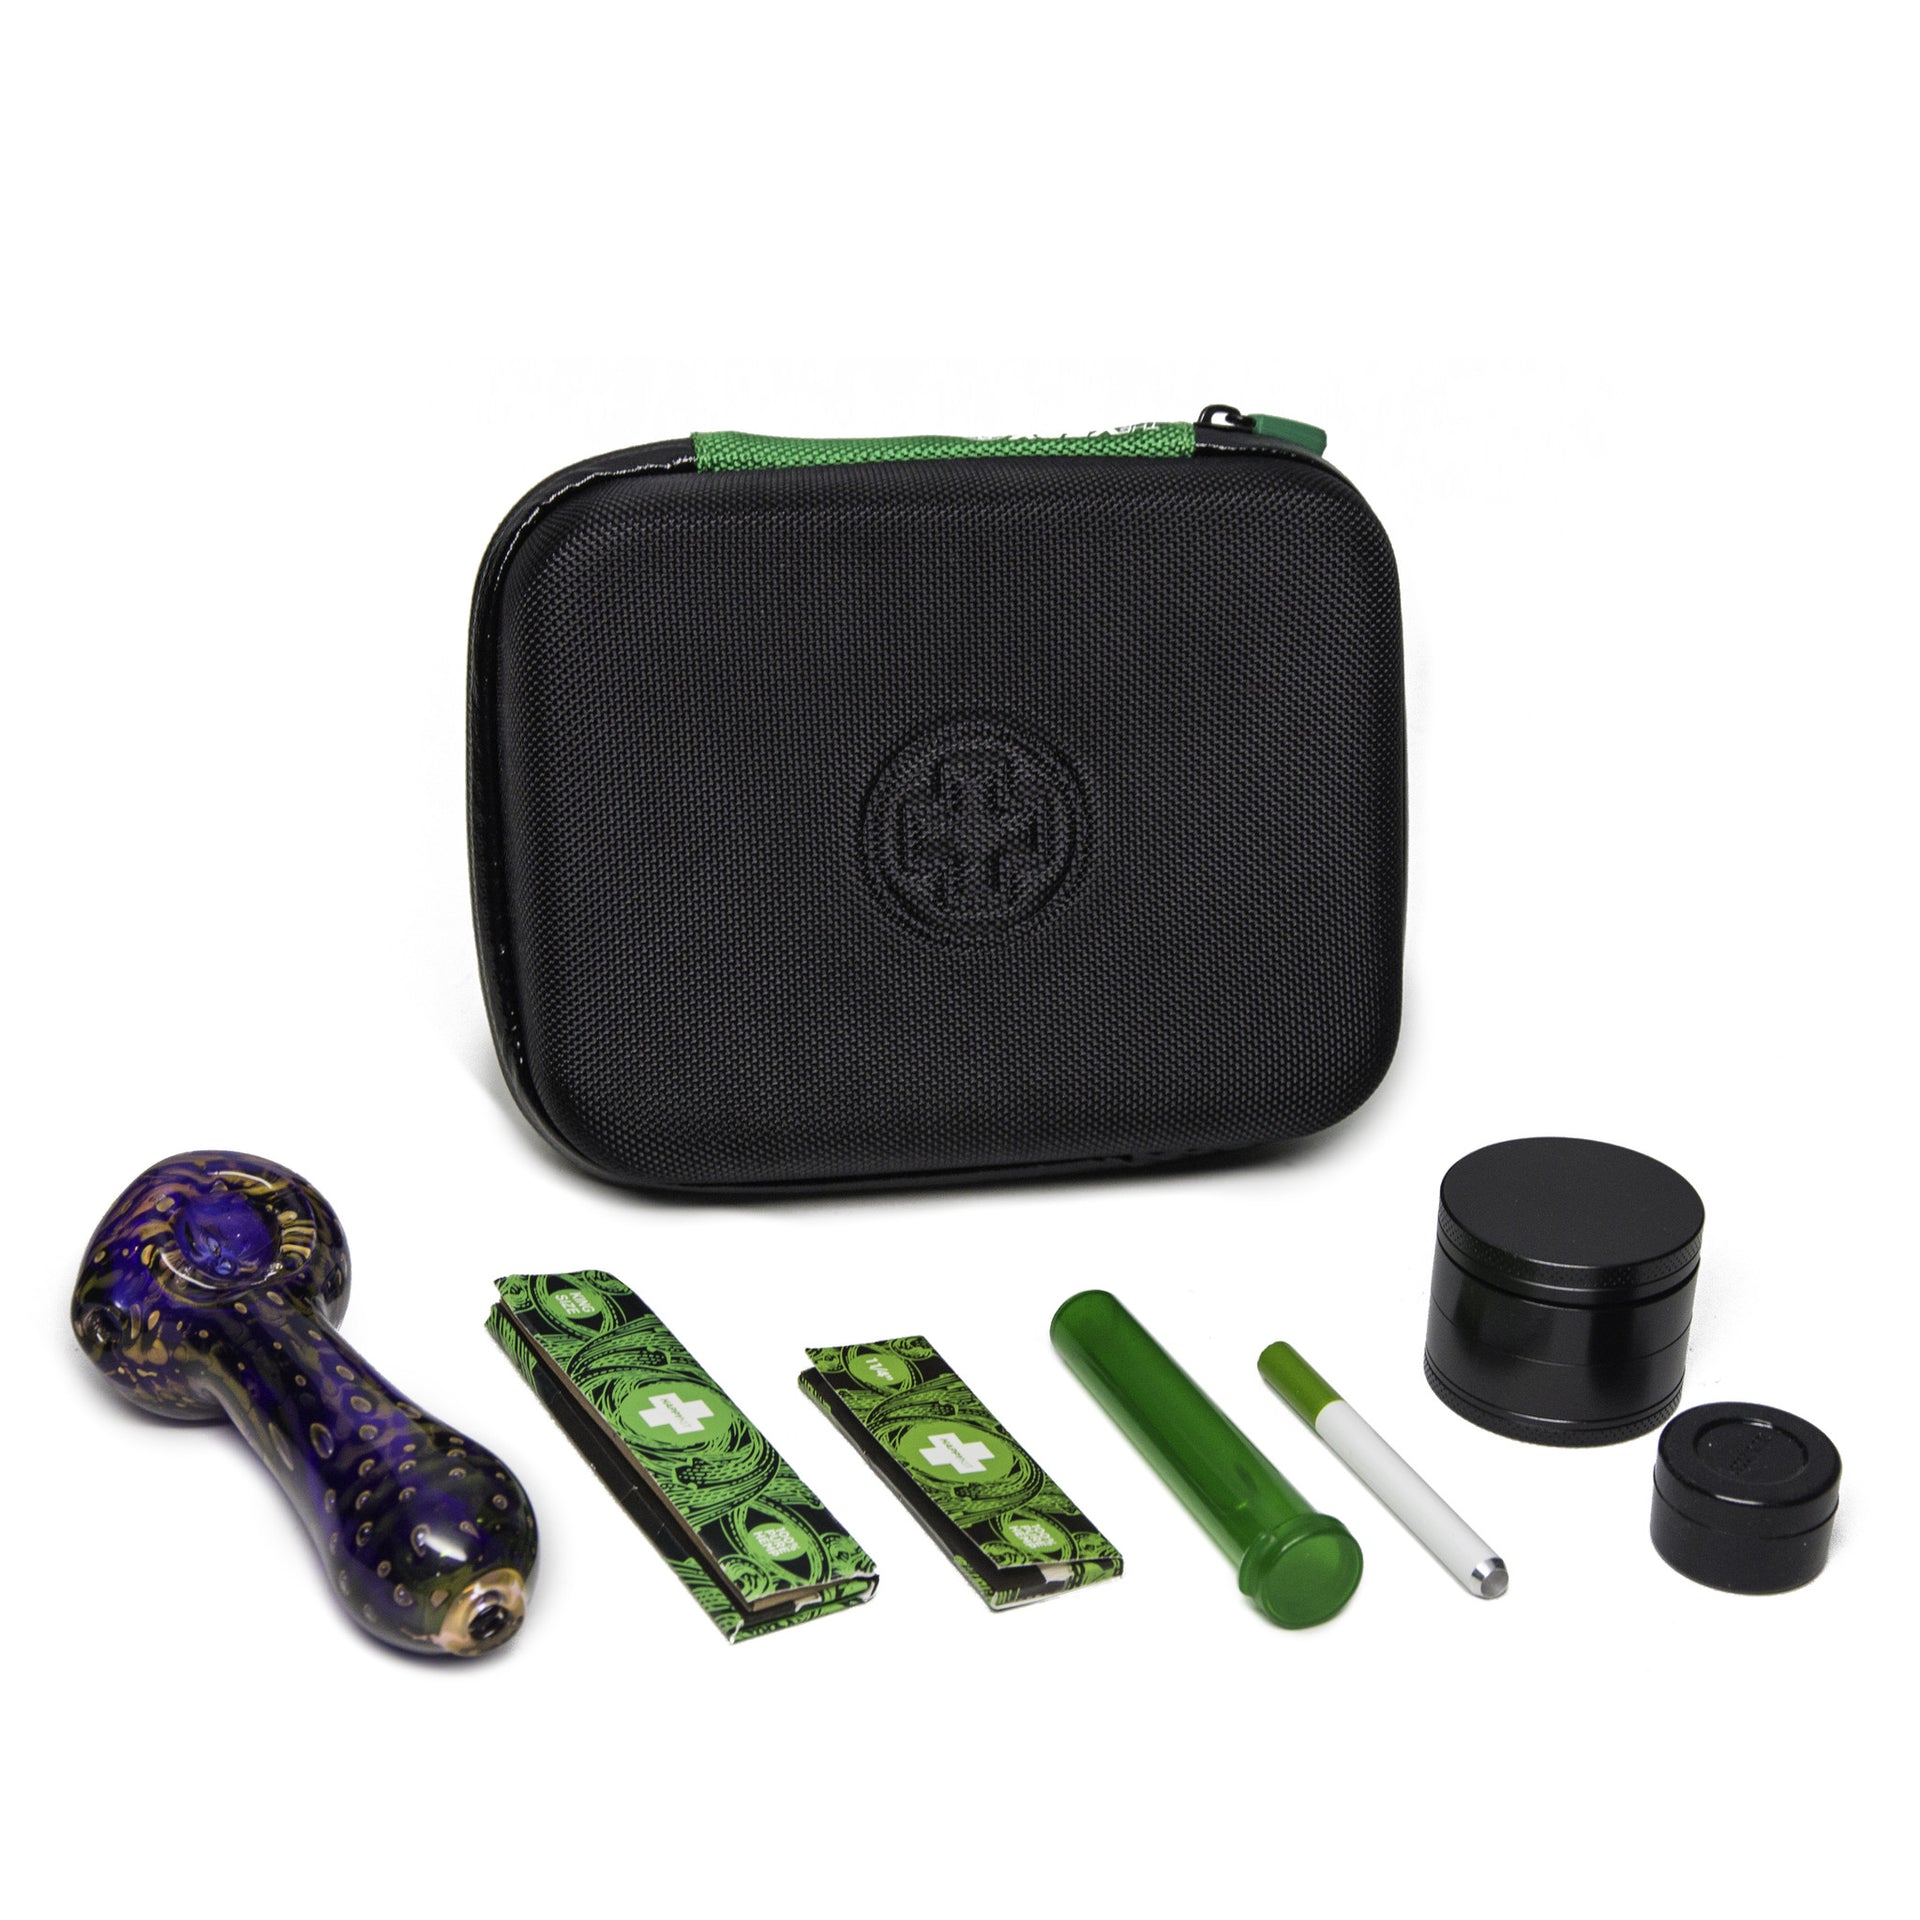 The Happy Kit Smoke Accessory Carry Case – Myxed Up Creations